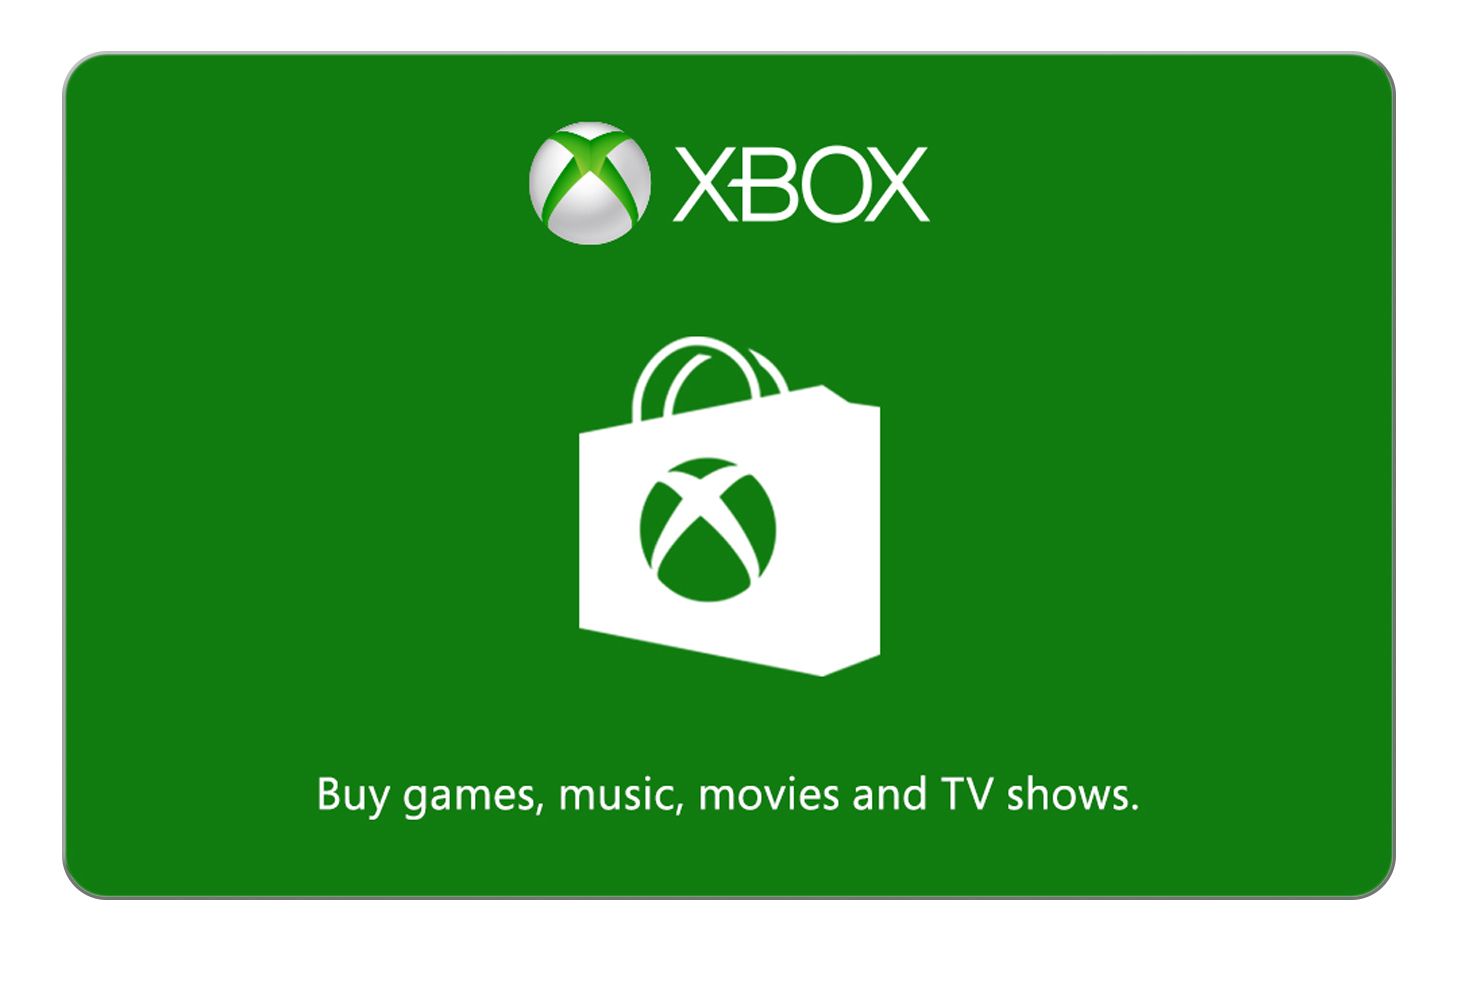 how to buy a xbox gift card